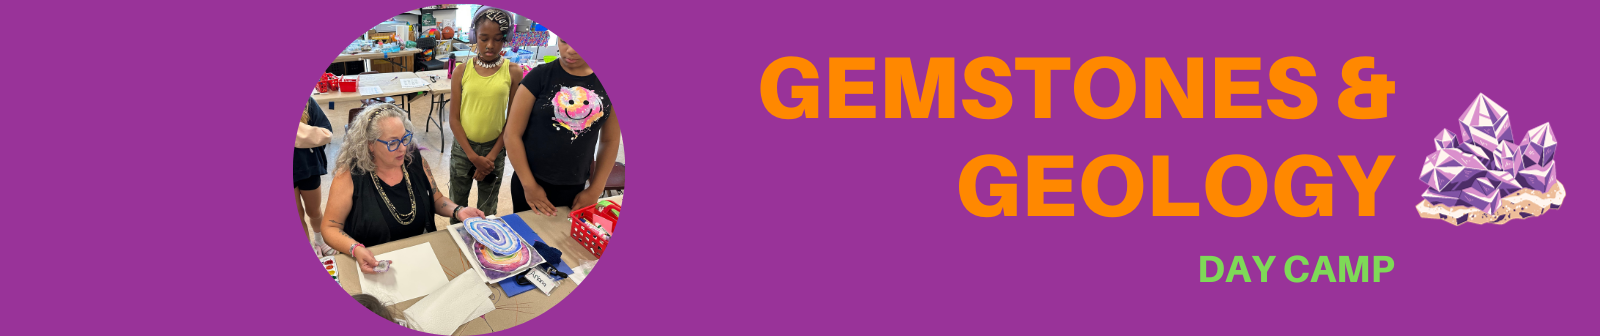 gemstones and geology day camp banner